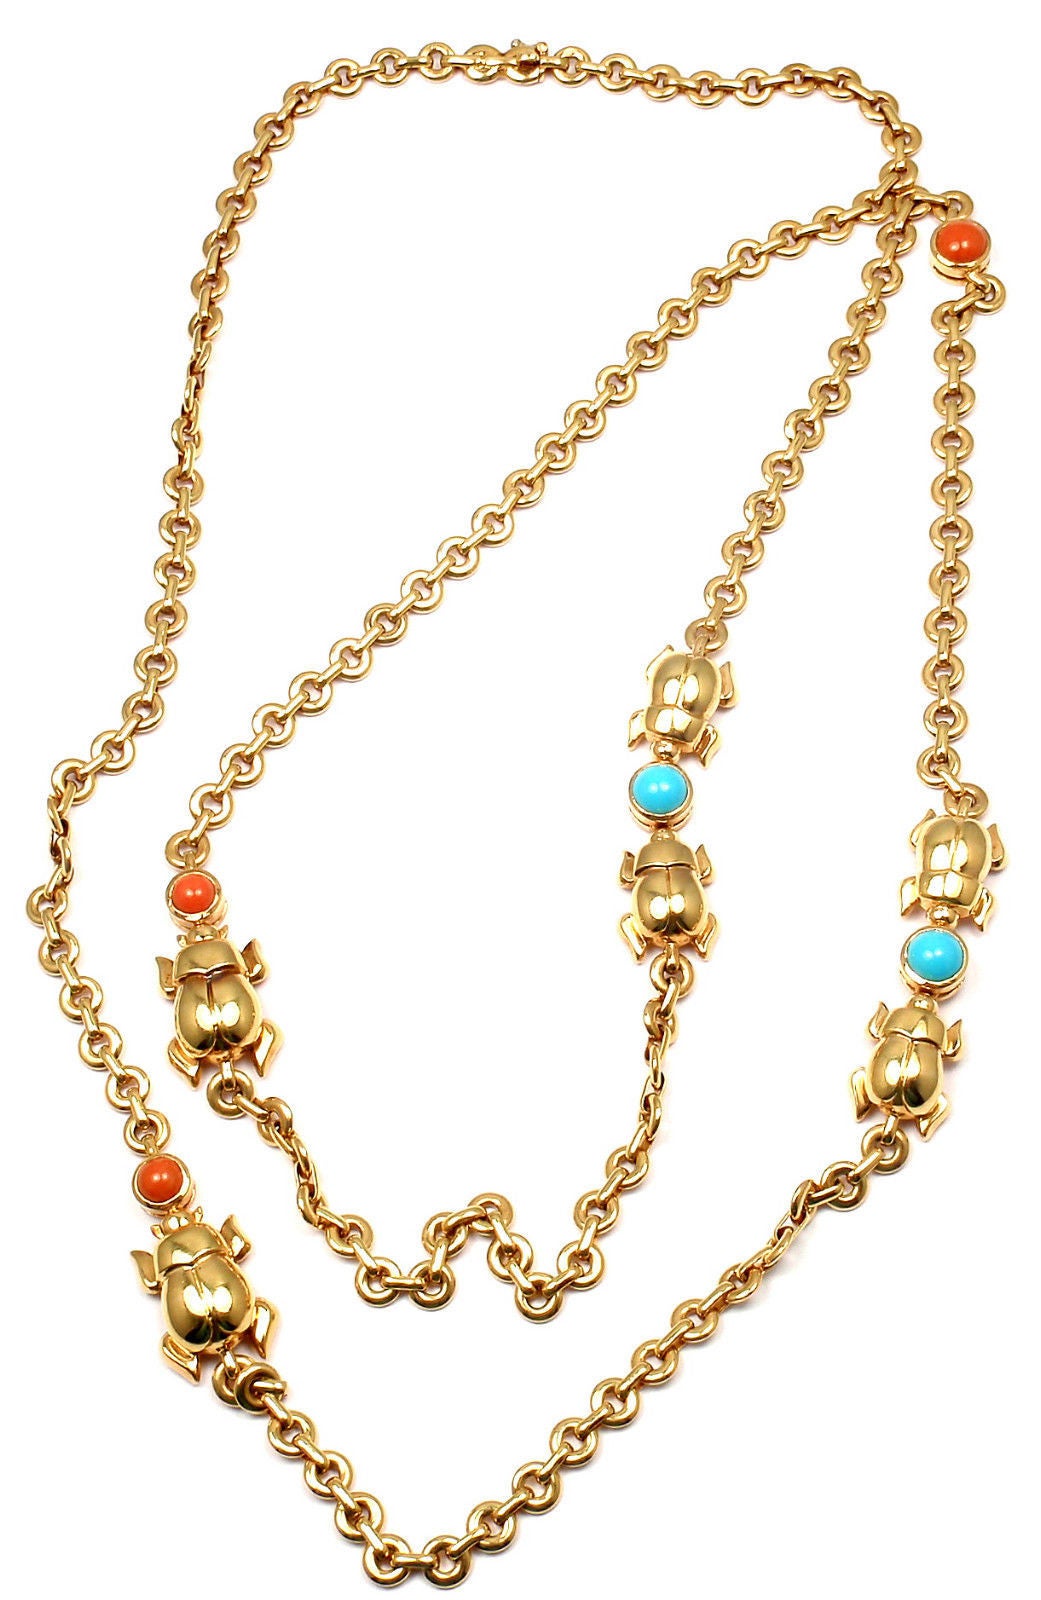 18k Yellow Gold Turquoise and Coral Scarab Link Necklace by Cartier.
With 3 round corals and 2 round turquoise
This necklace comes with an original Cartier box.

Details:
Length: 33